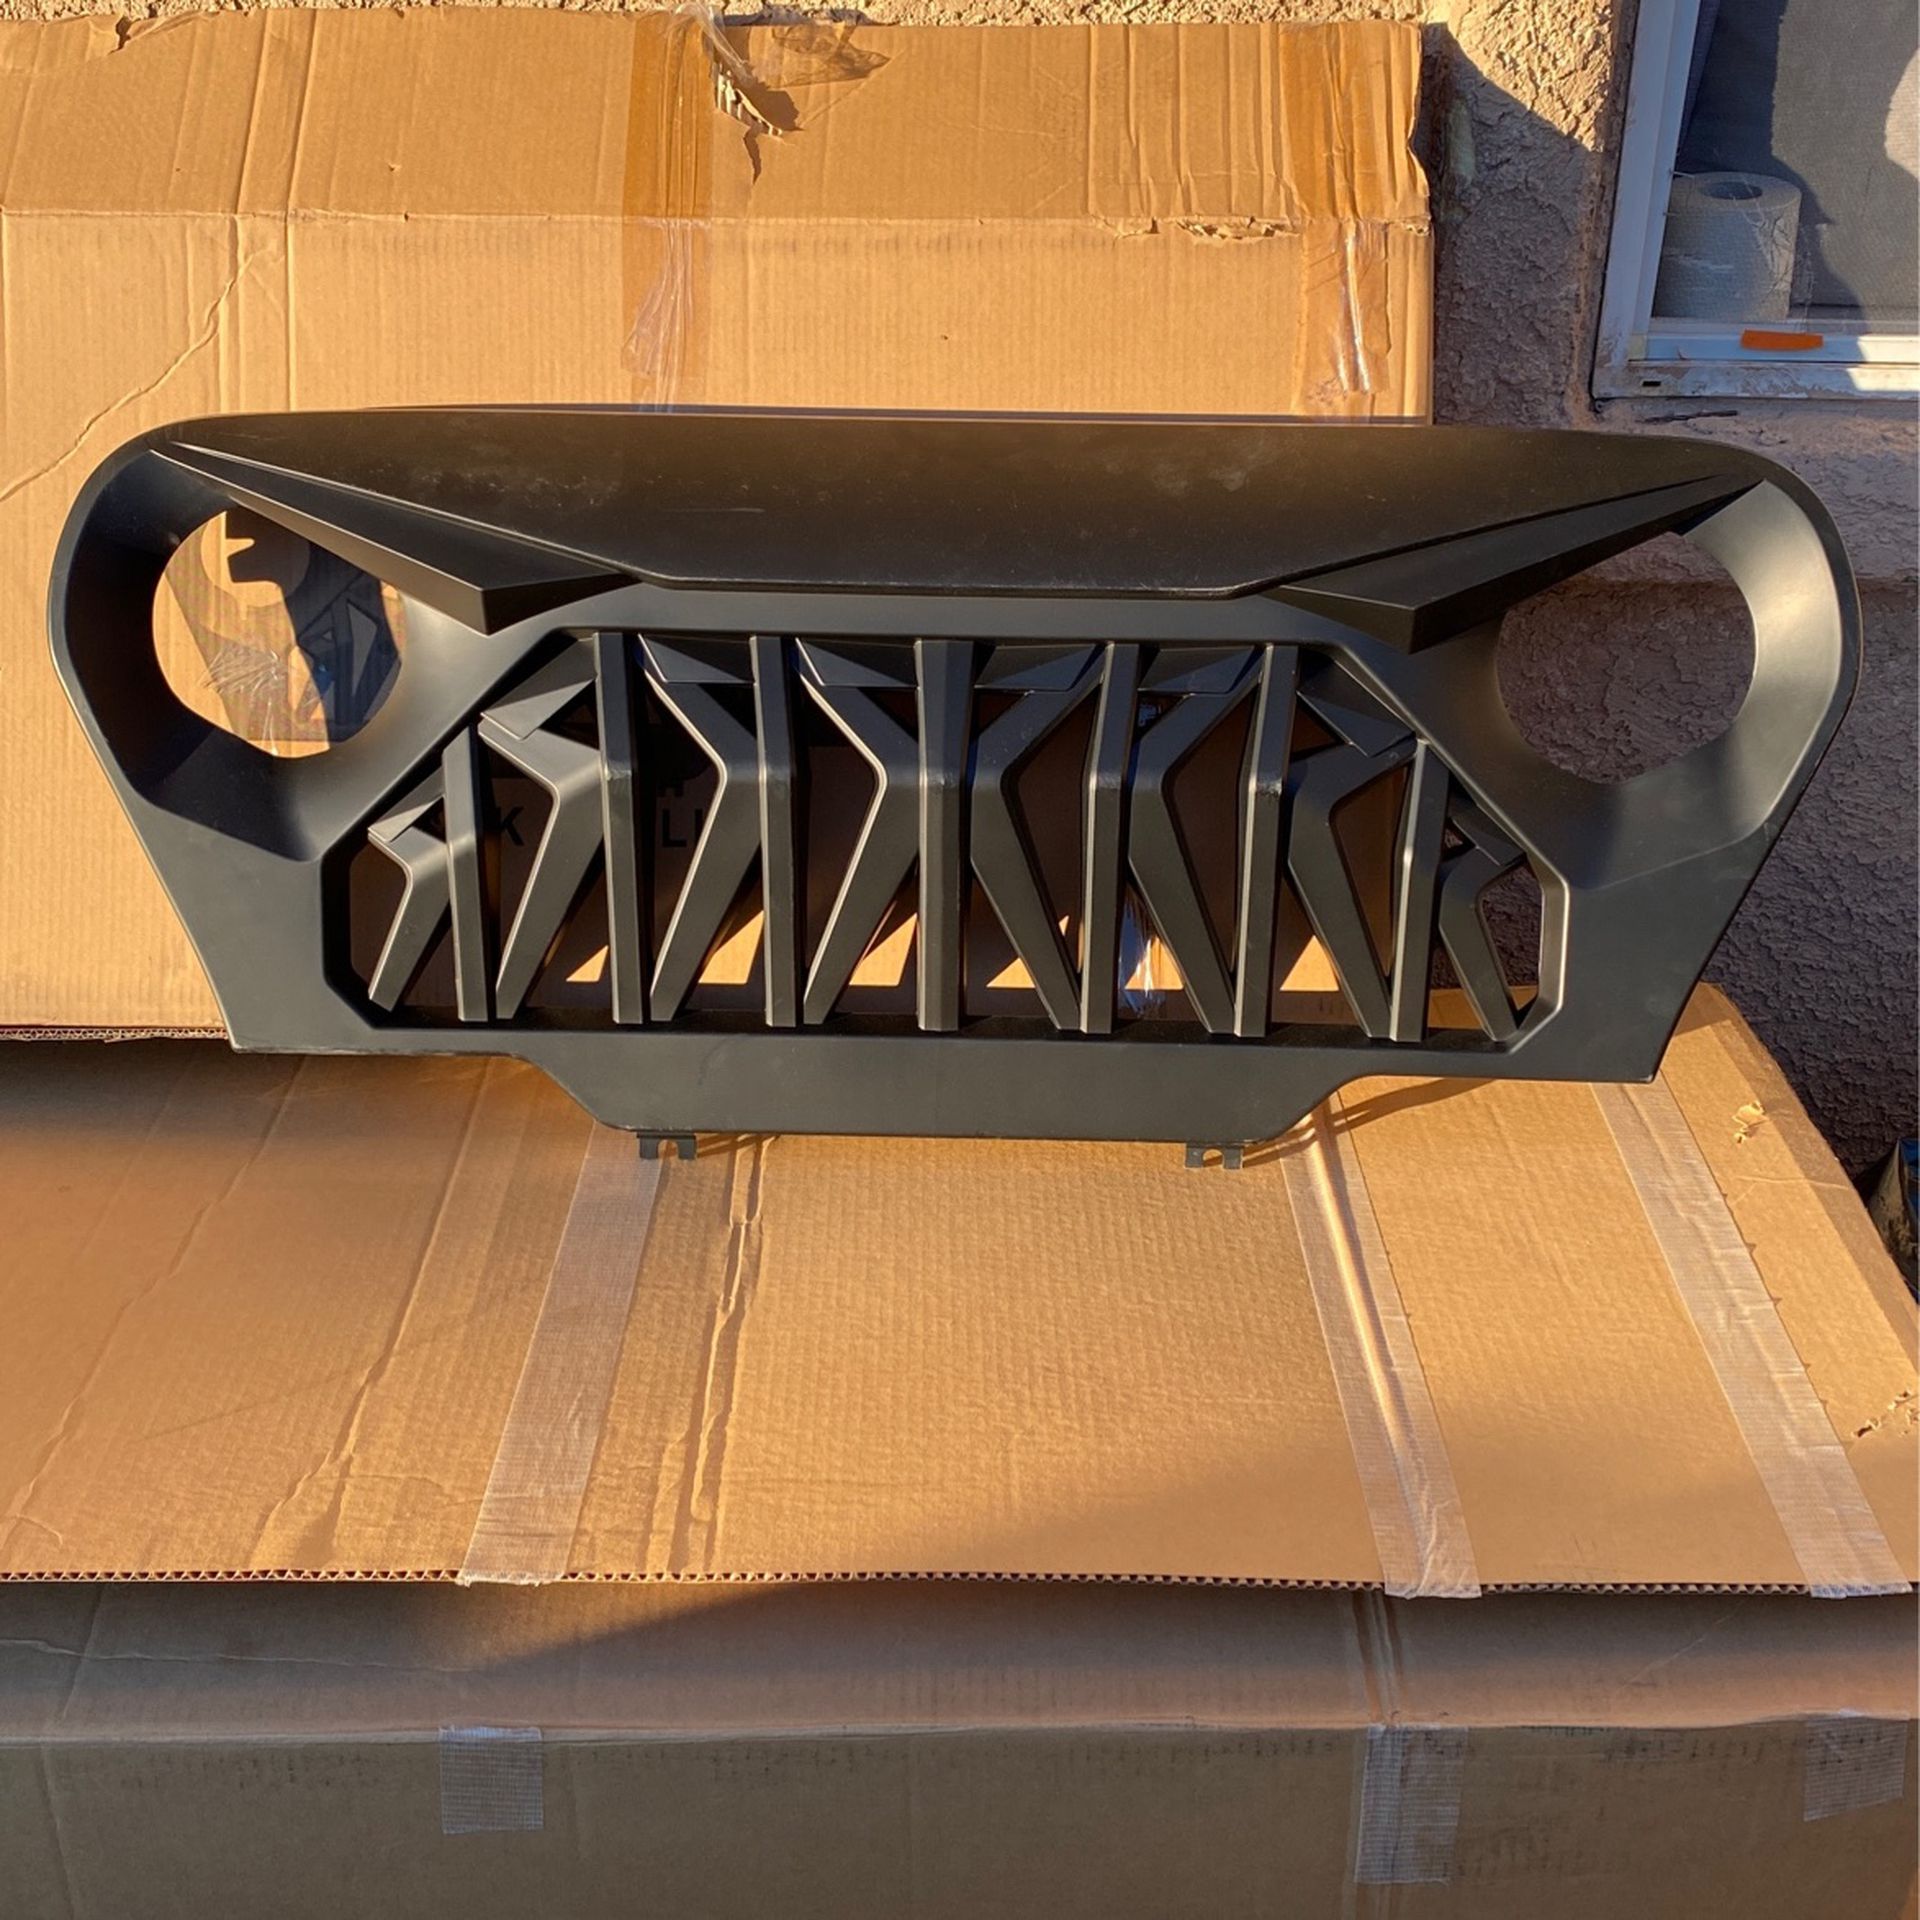 Jeep Grille